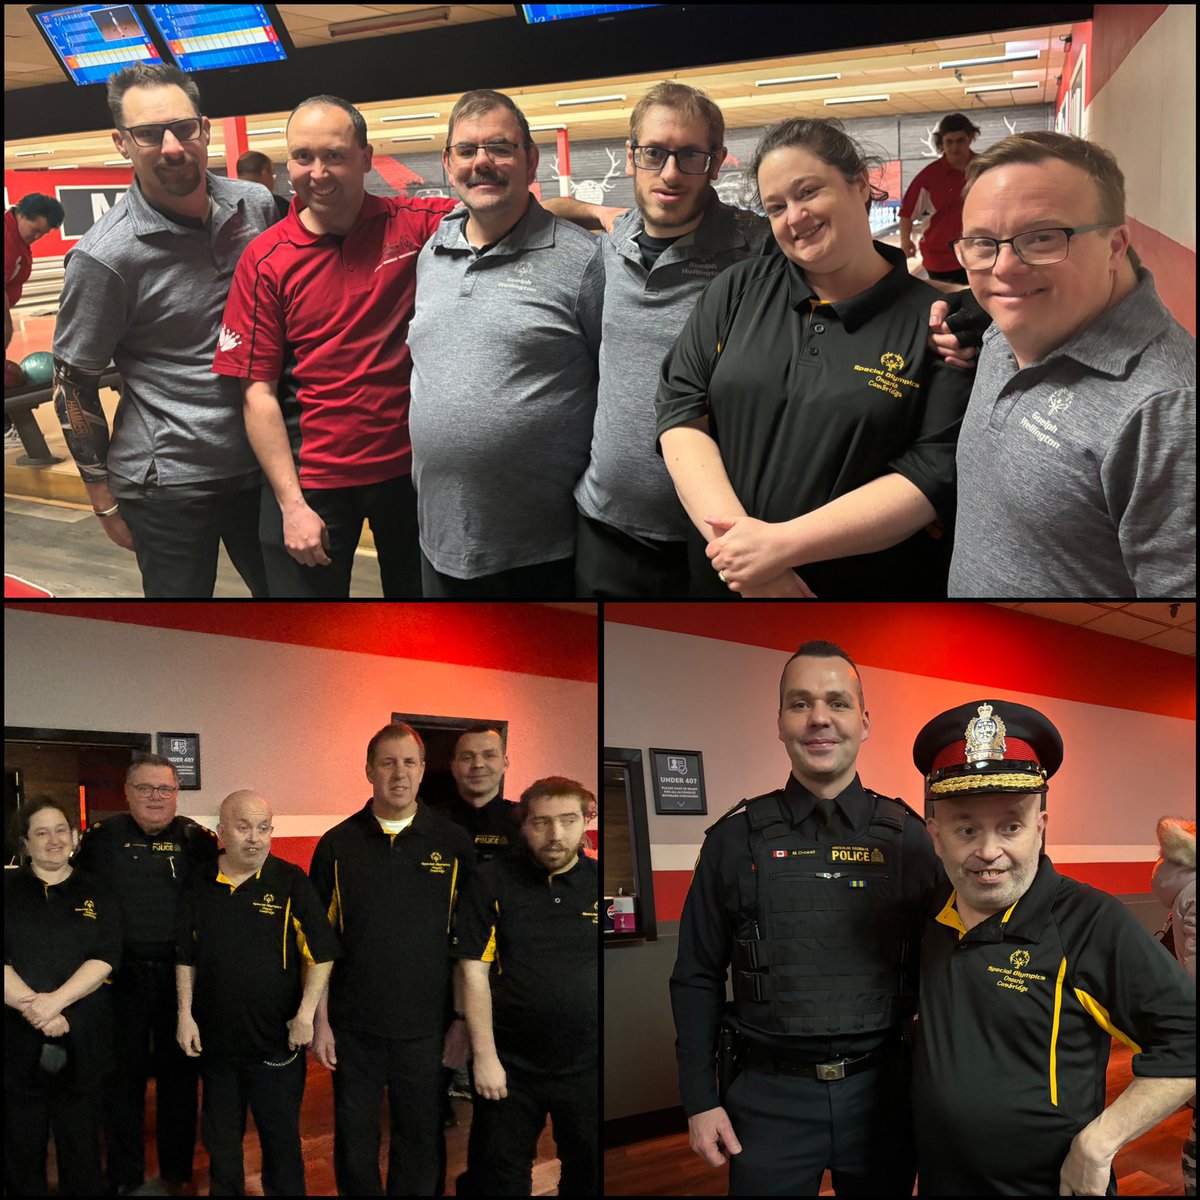 Having a great time with @SOOntario athletes today at @BowleroBowl Frederick Lanes! #Strike🎳